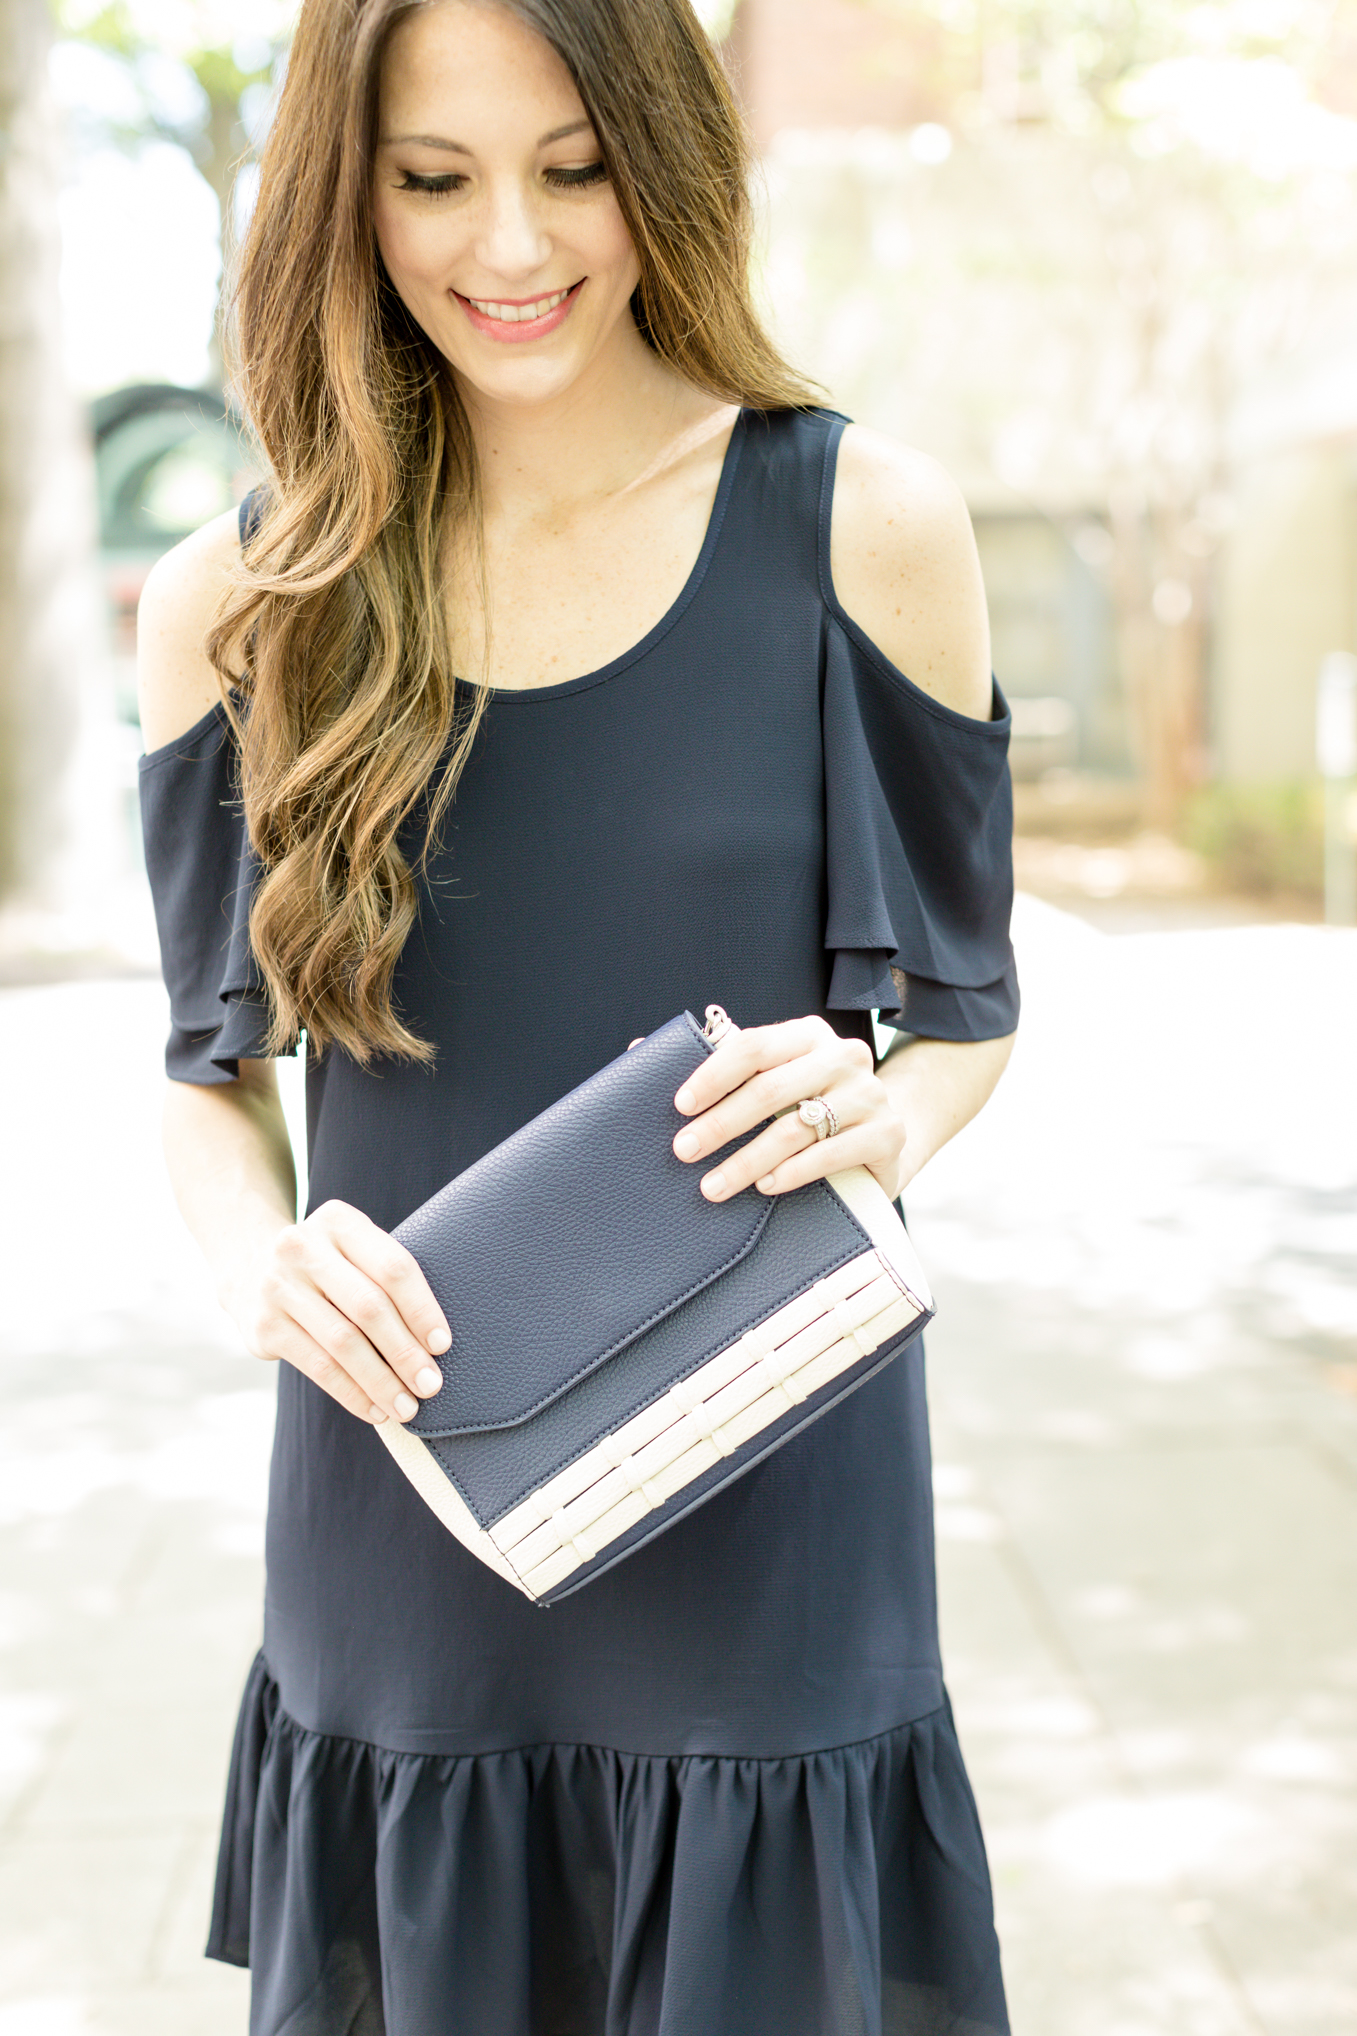 Little Navy Dress | Lifestyle blogger Elle Bowes shares a summer style twist on the LBD